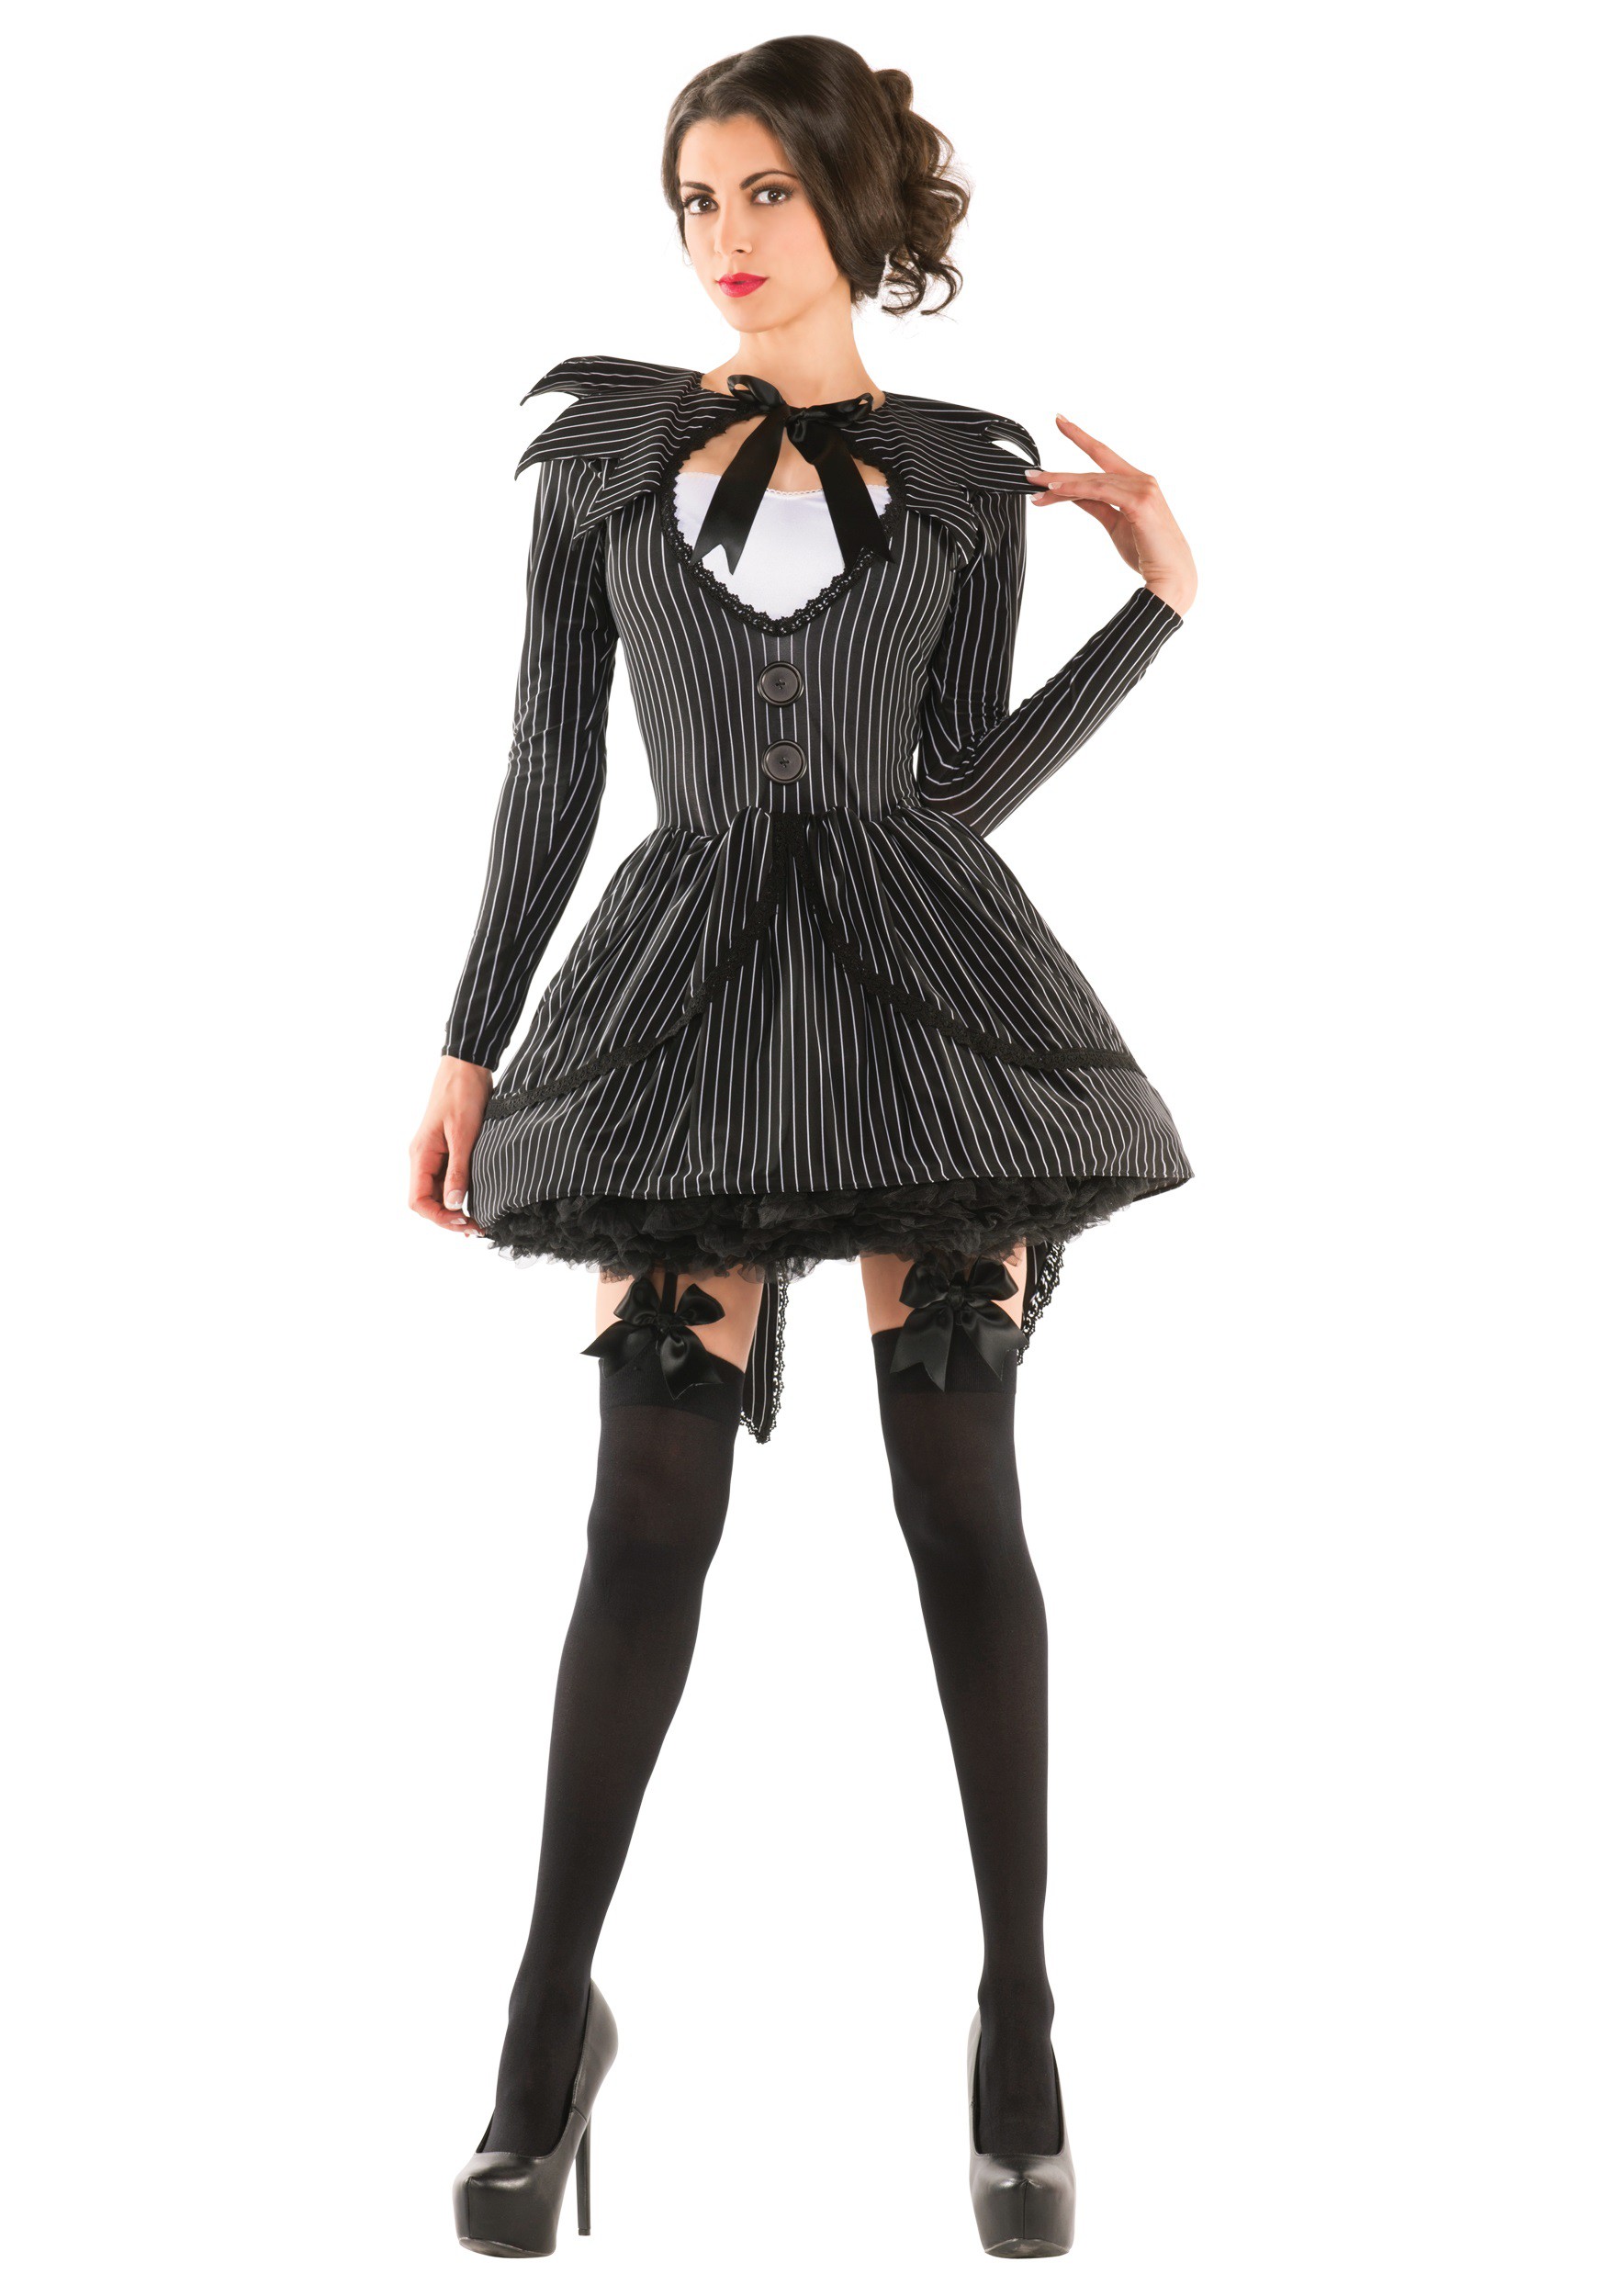 Image of Bad Dreams Babe Adult Costume ID PKPK407-L